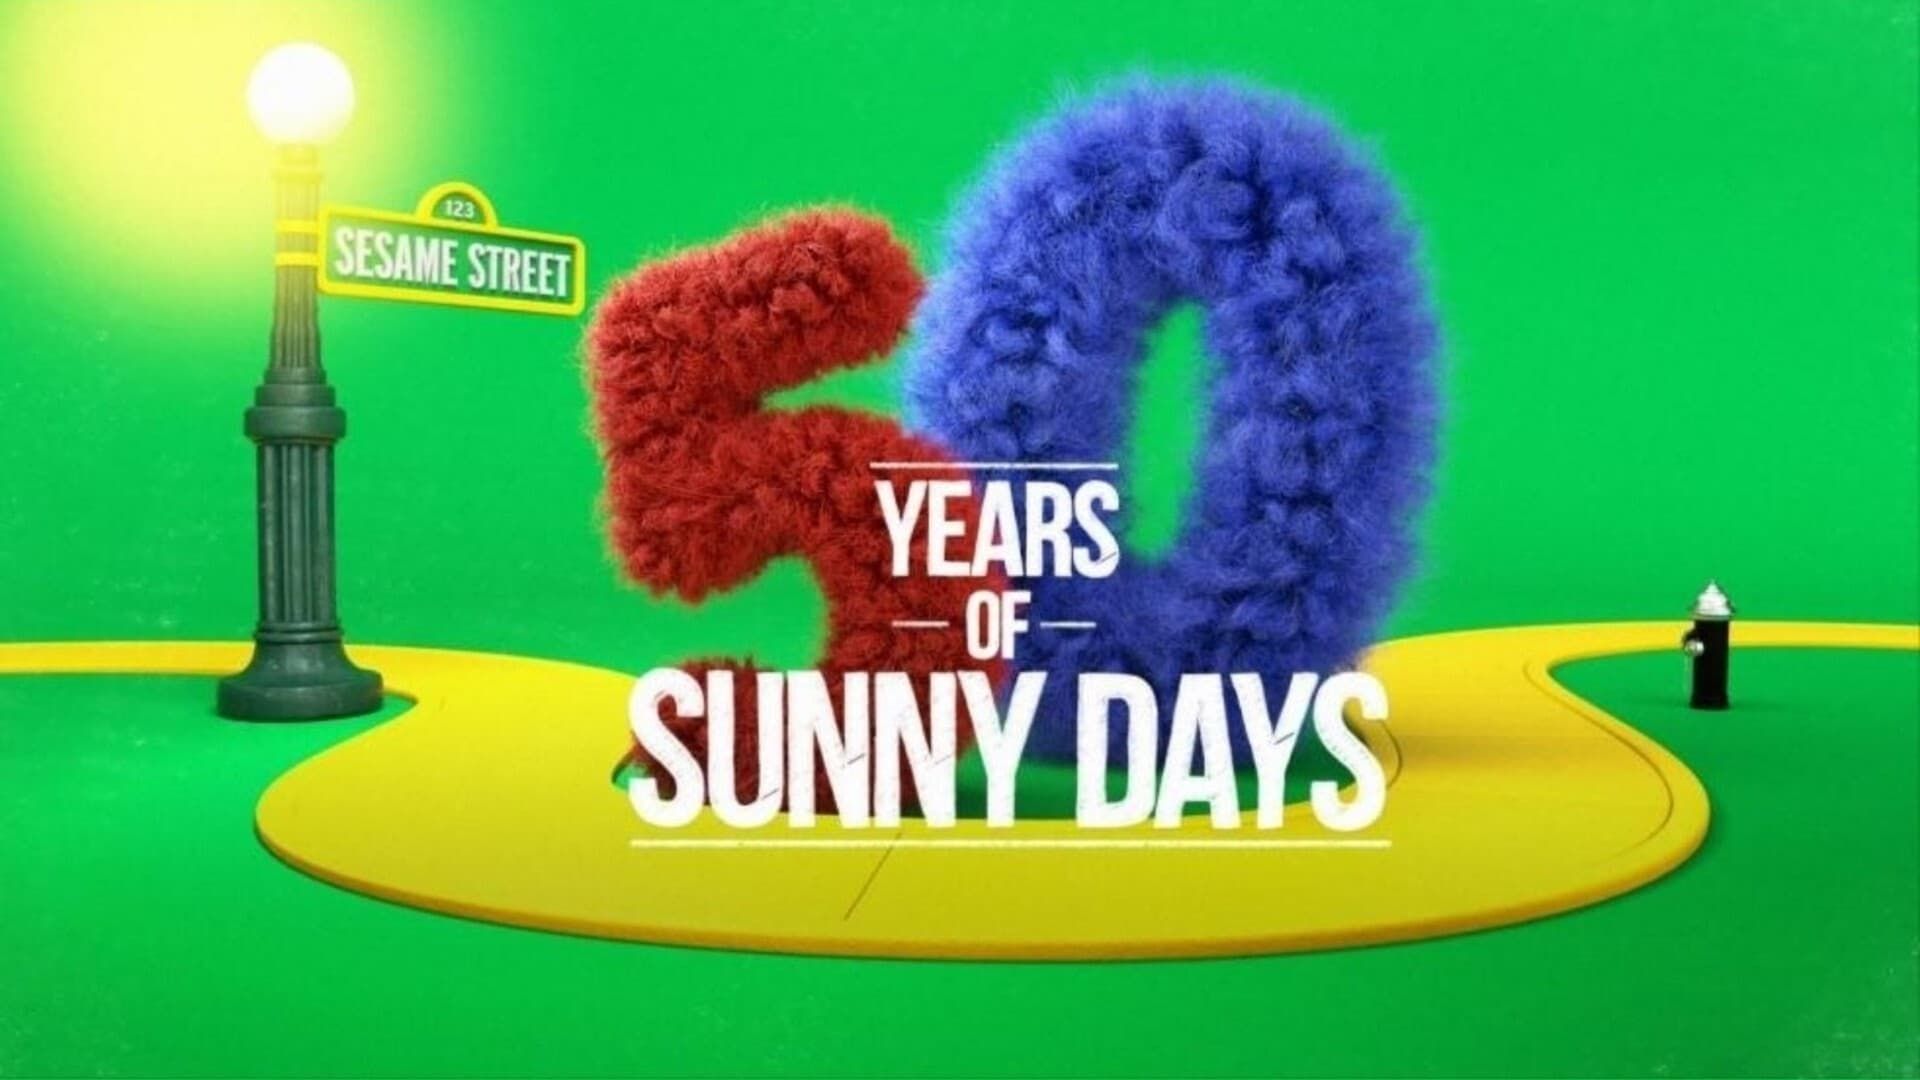 Sesame Street: 50 Years of Sunny Days background